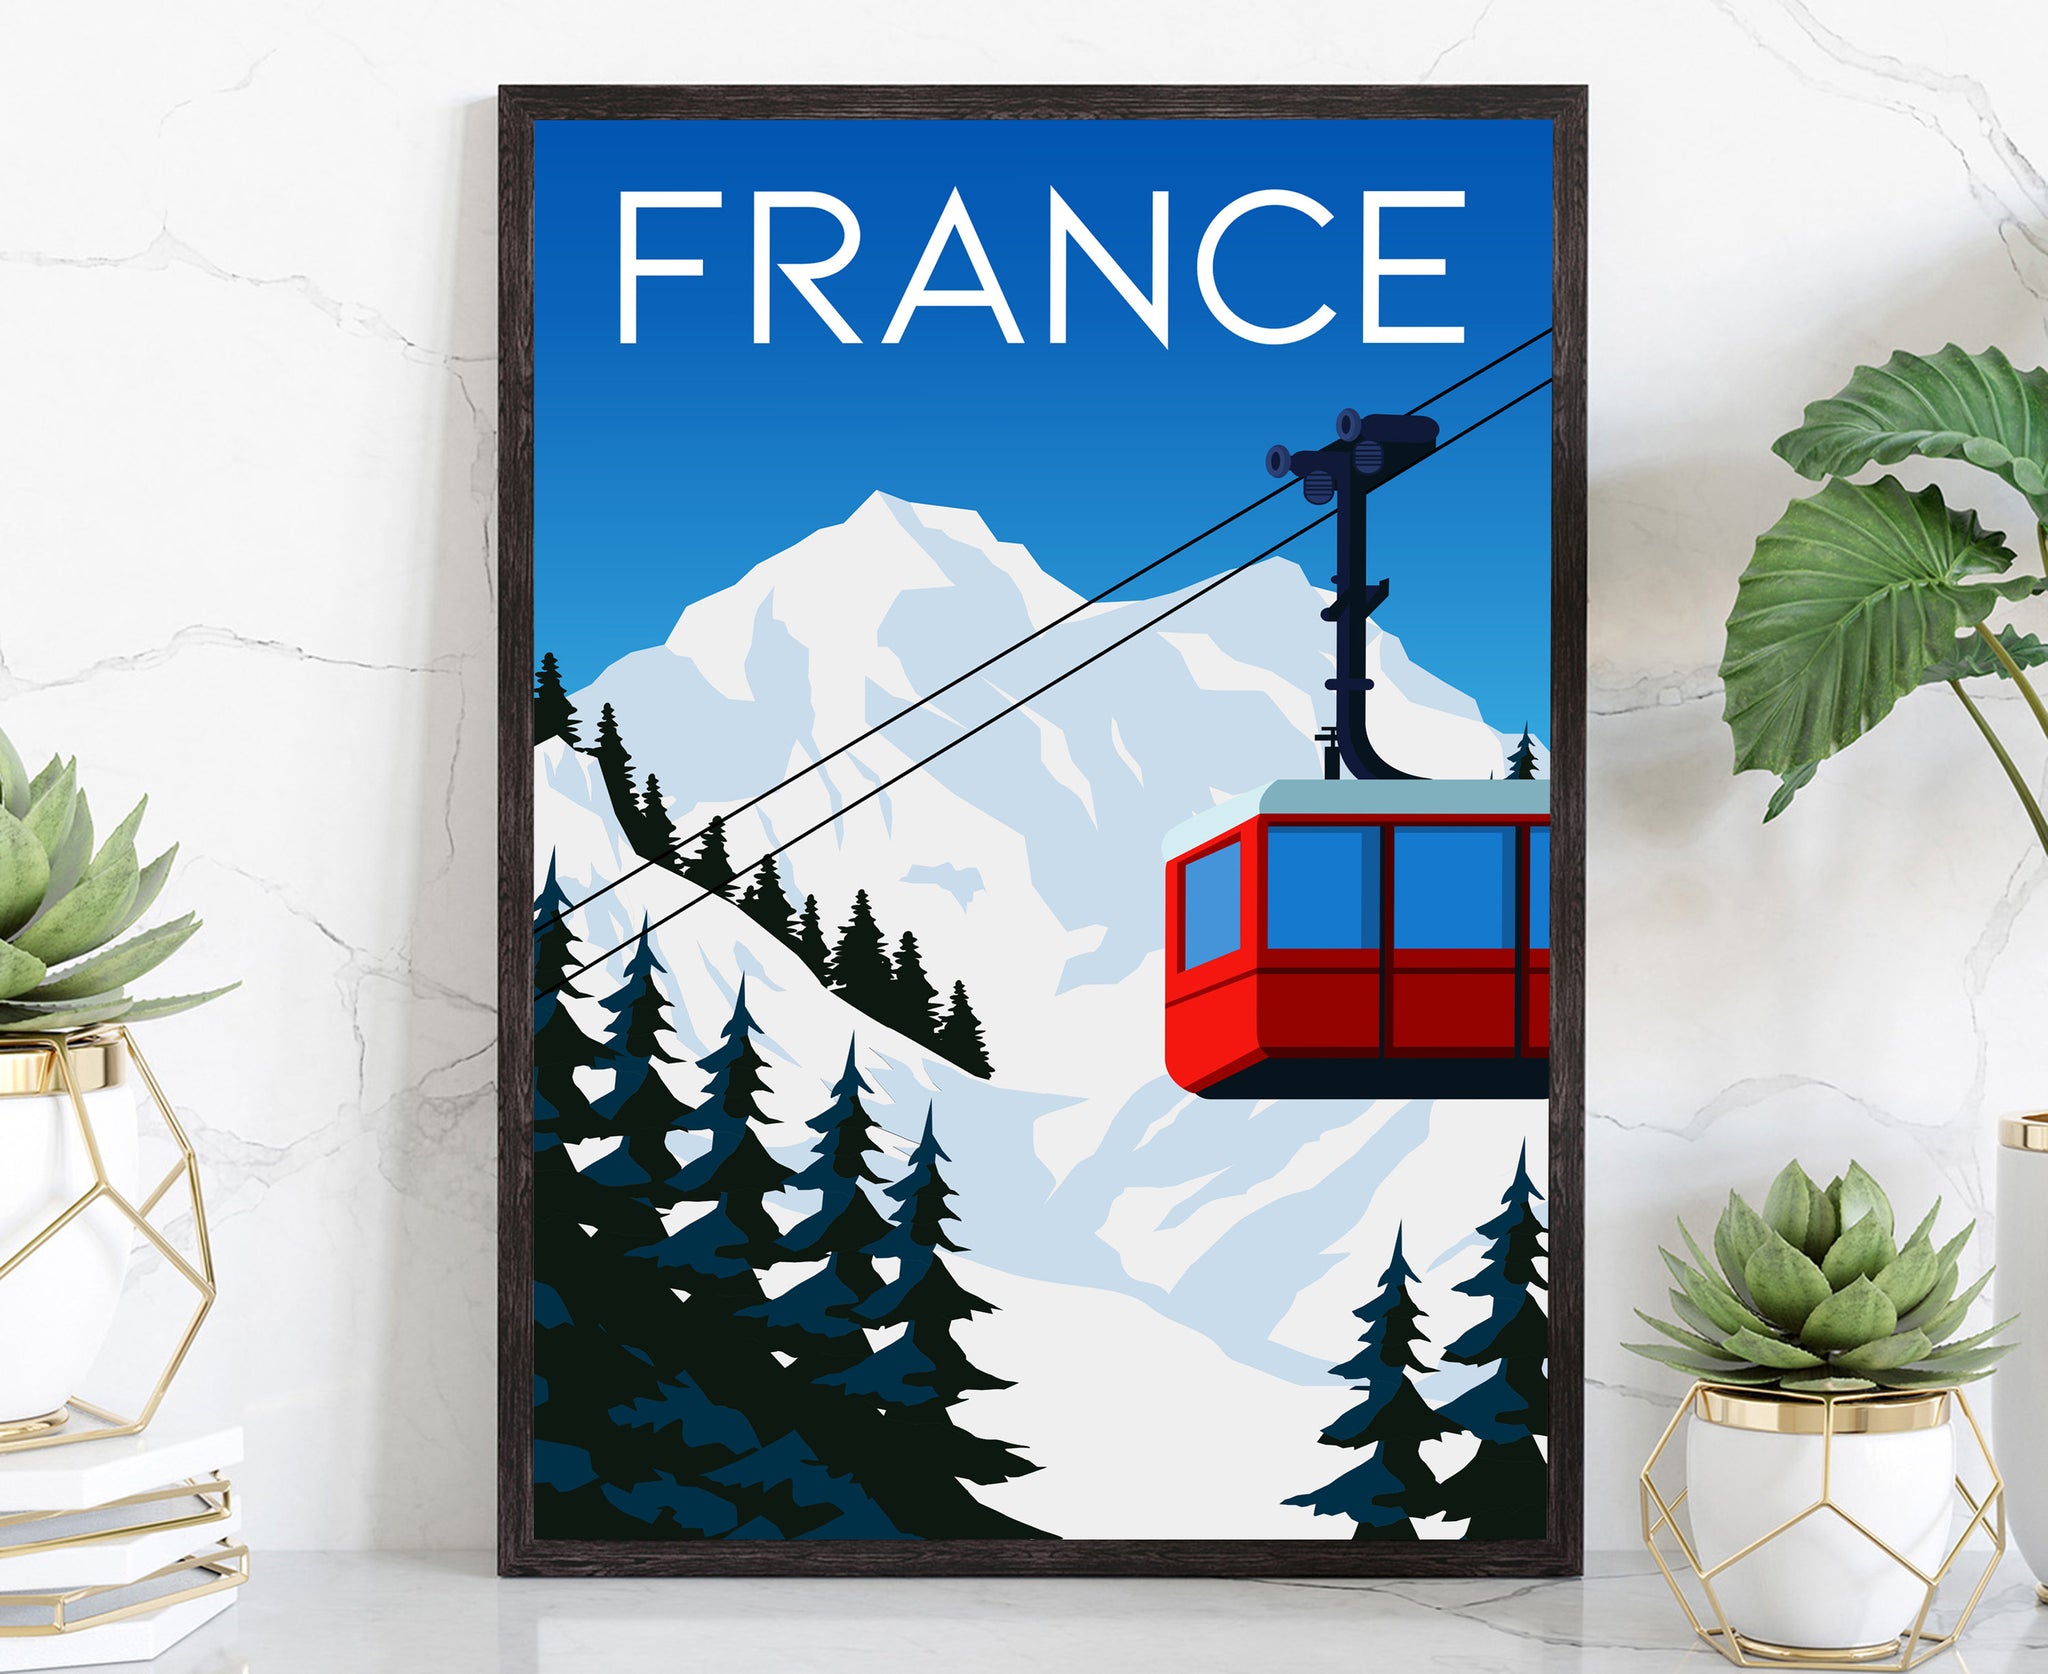 FRANCE travel poster, France cityscape poster, France landmark poster wall art, Home wall art, Office wall decoration, Birthday gift